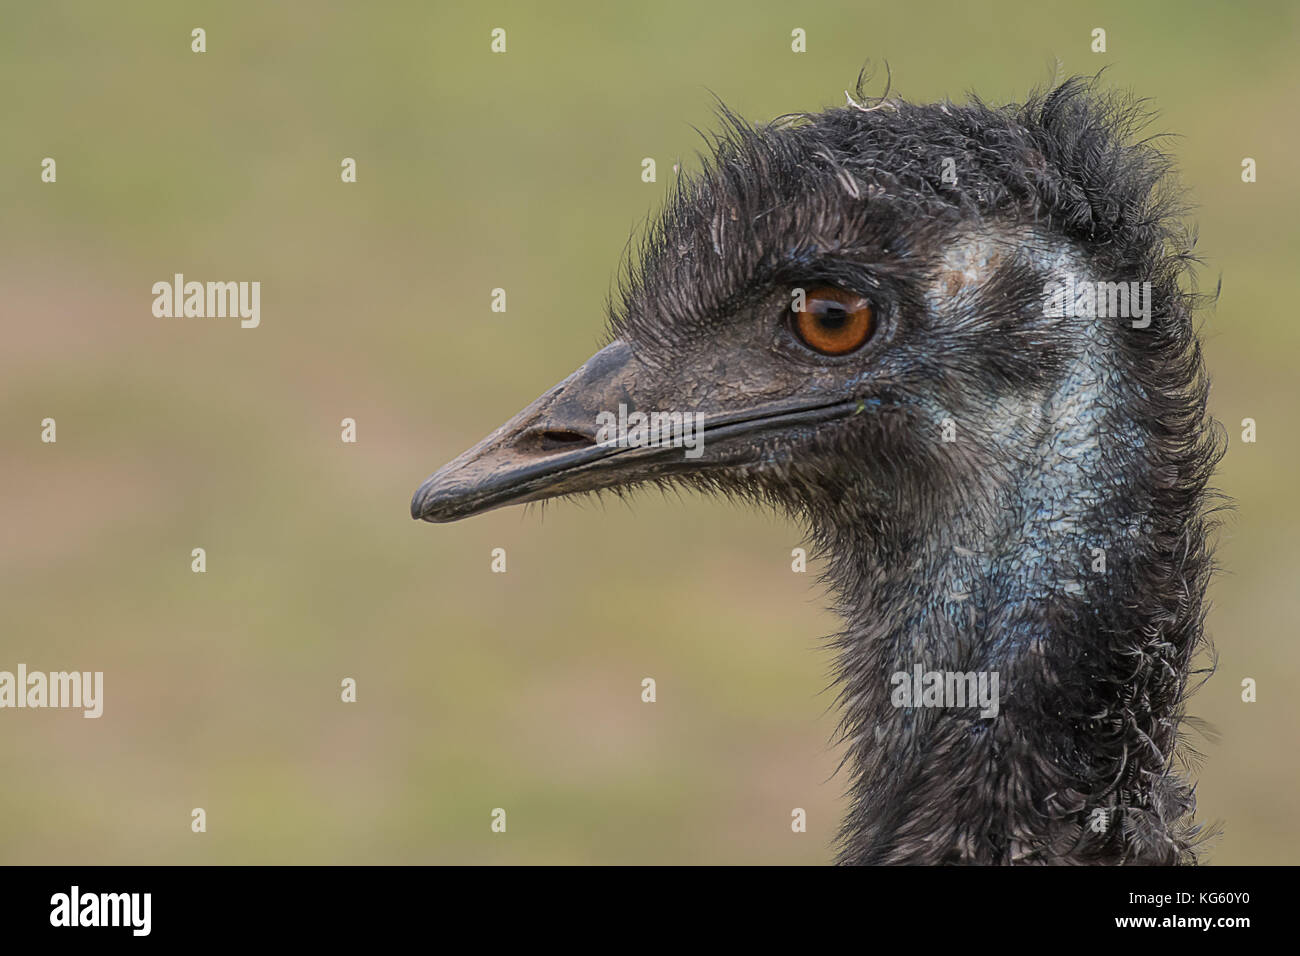 A very close profile photograph of the head of an emu showing detail in the eye and beak Stock Photo